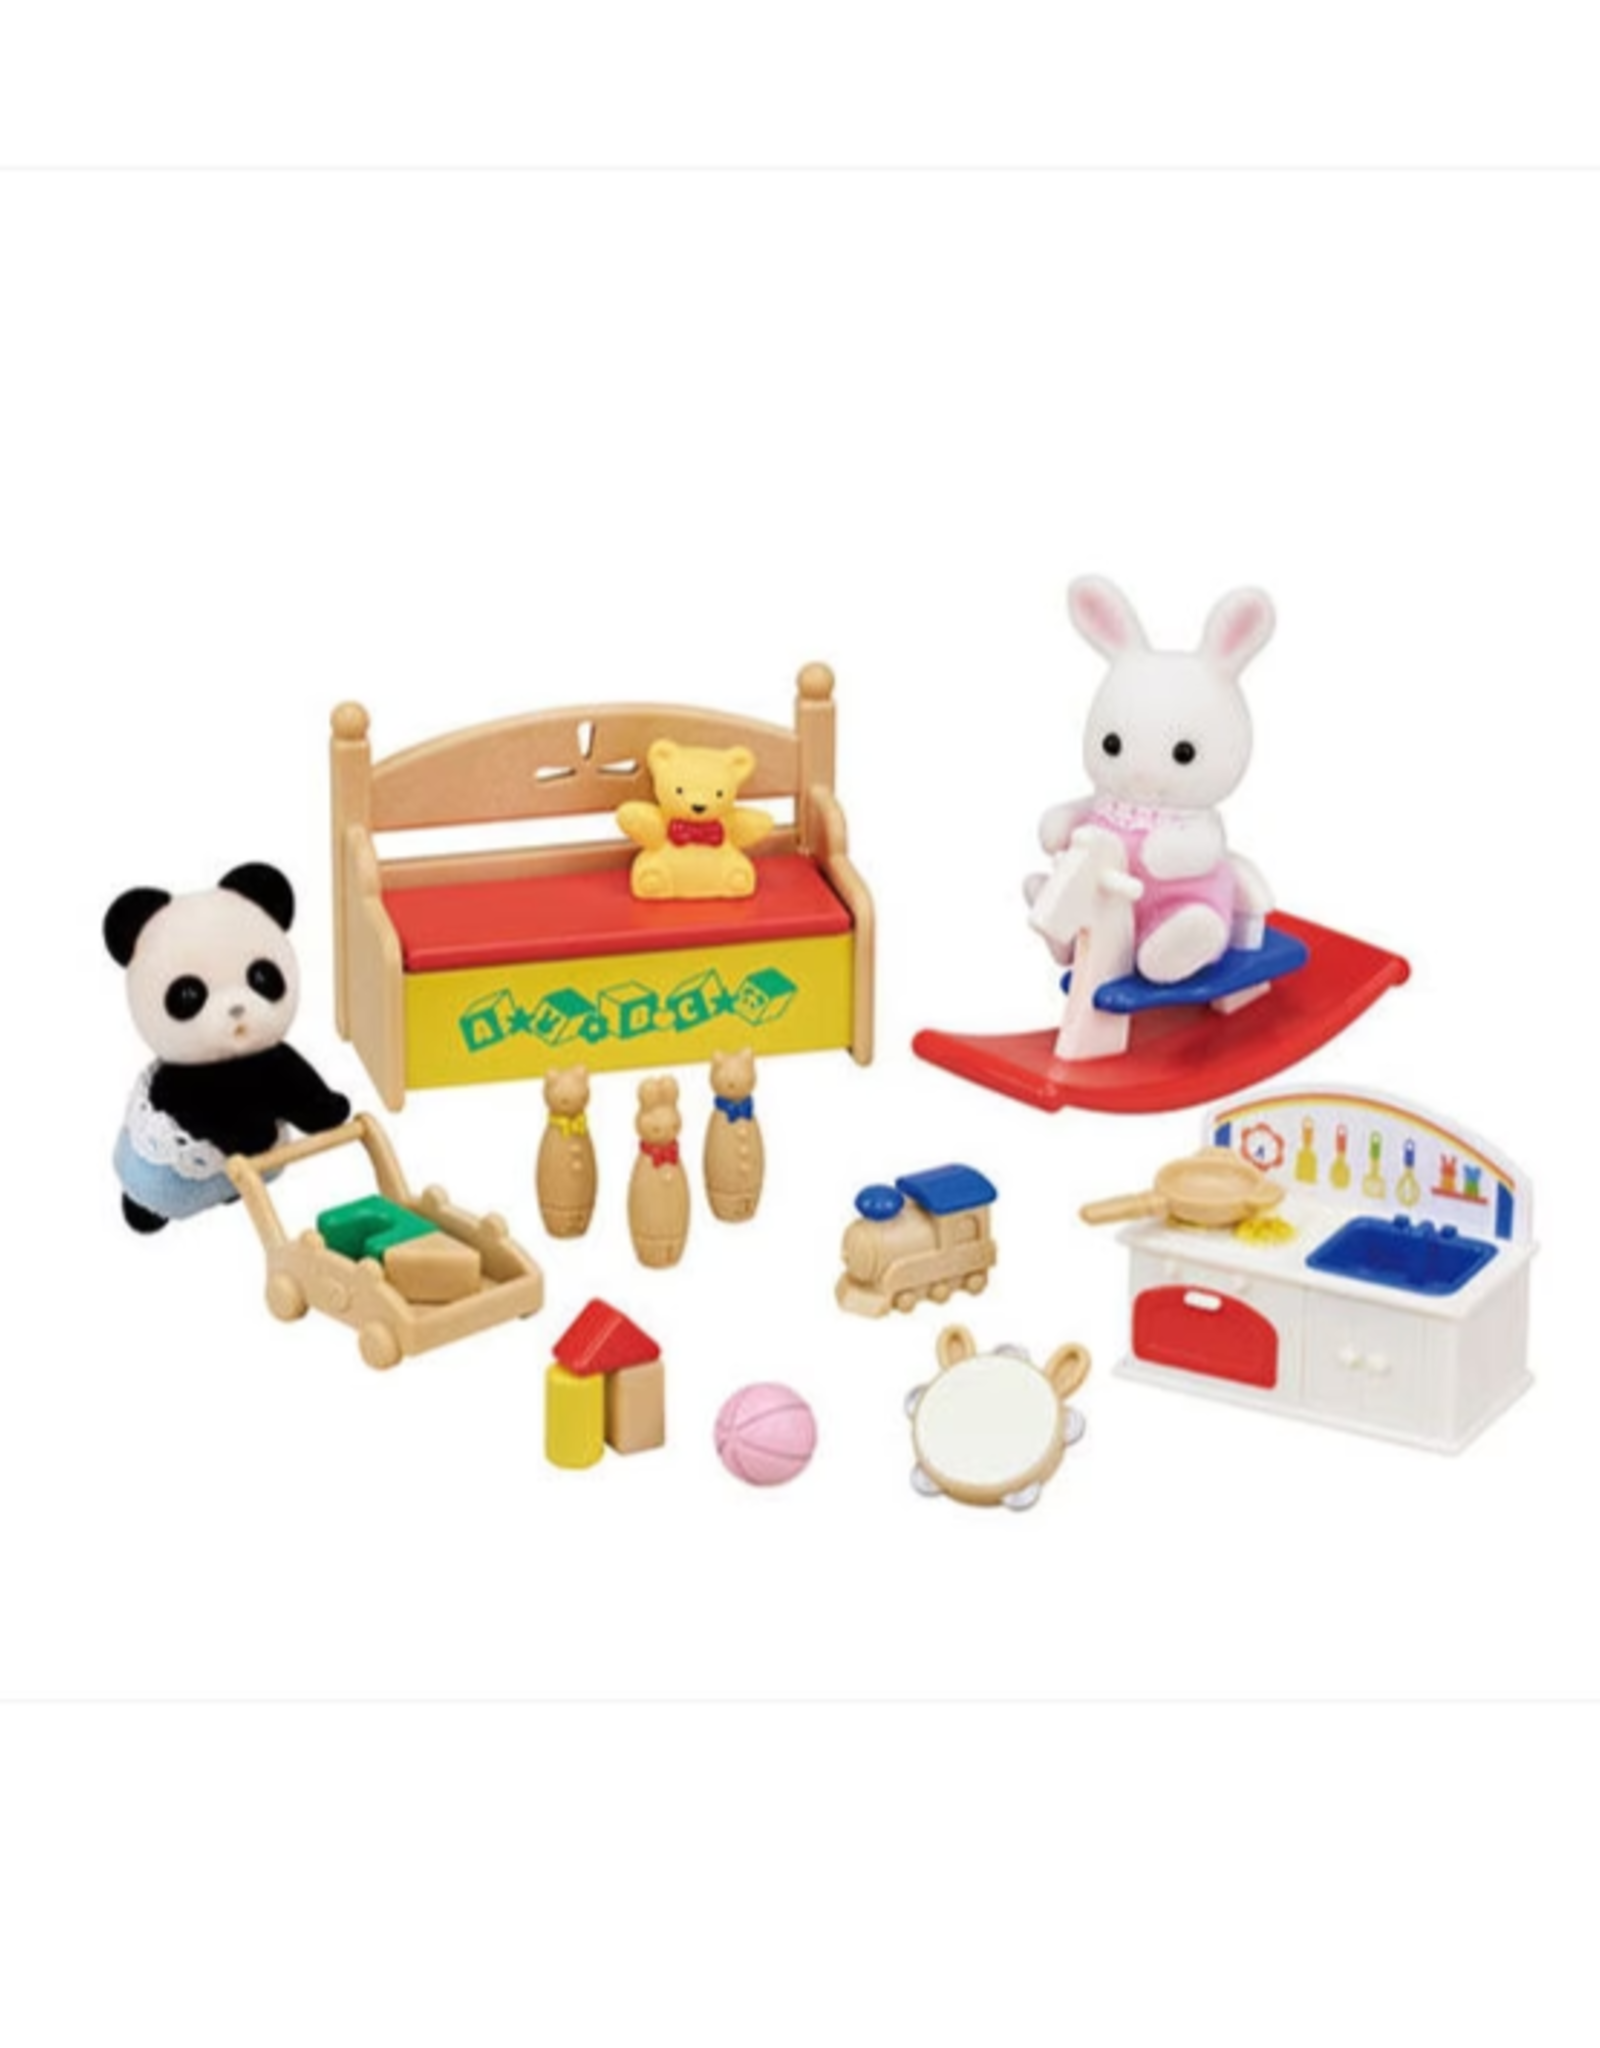 Calico Critters Calico Critters - Baby's Toy Box Snow Rabbit & Panda Babies